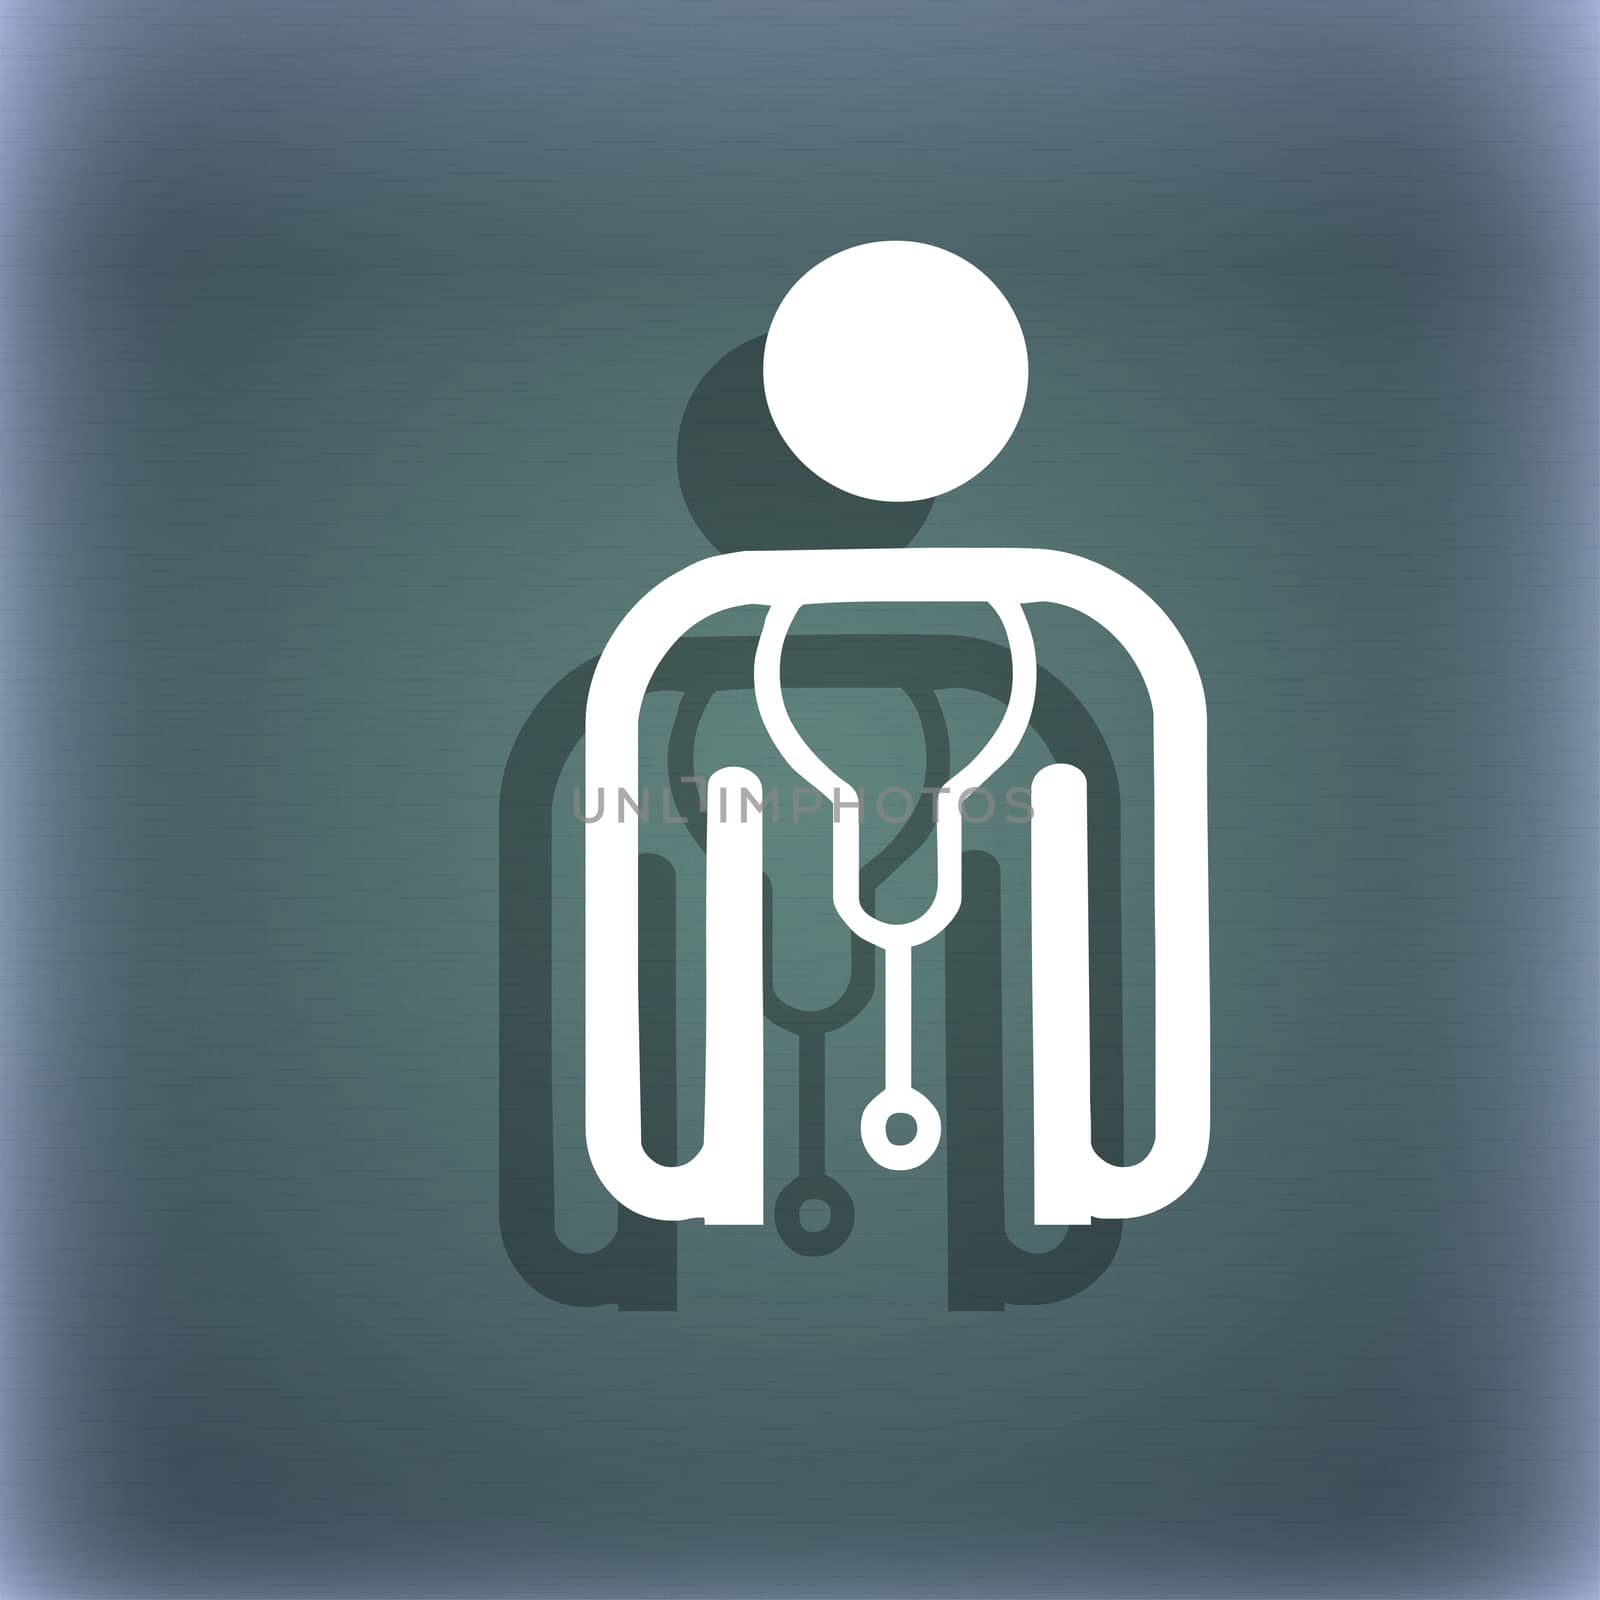 doctor icon symbol on the blue-green abstract background with shadow and space for your text. illustration